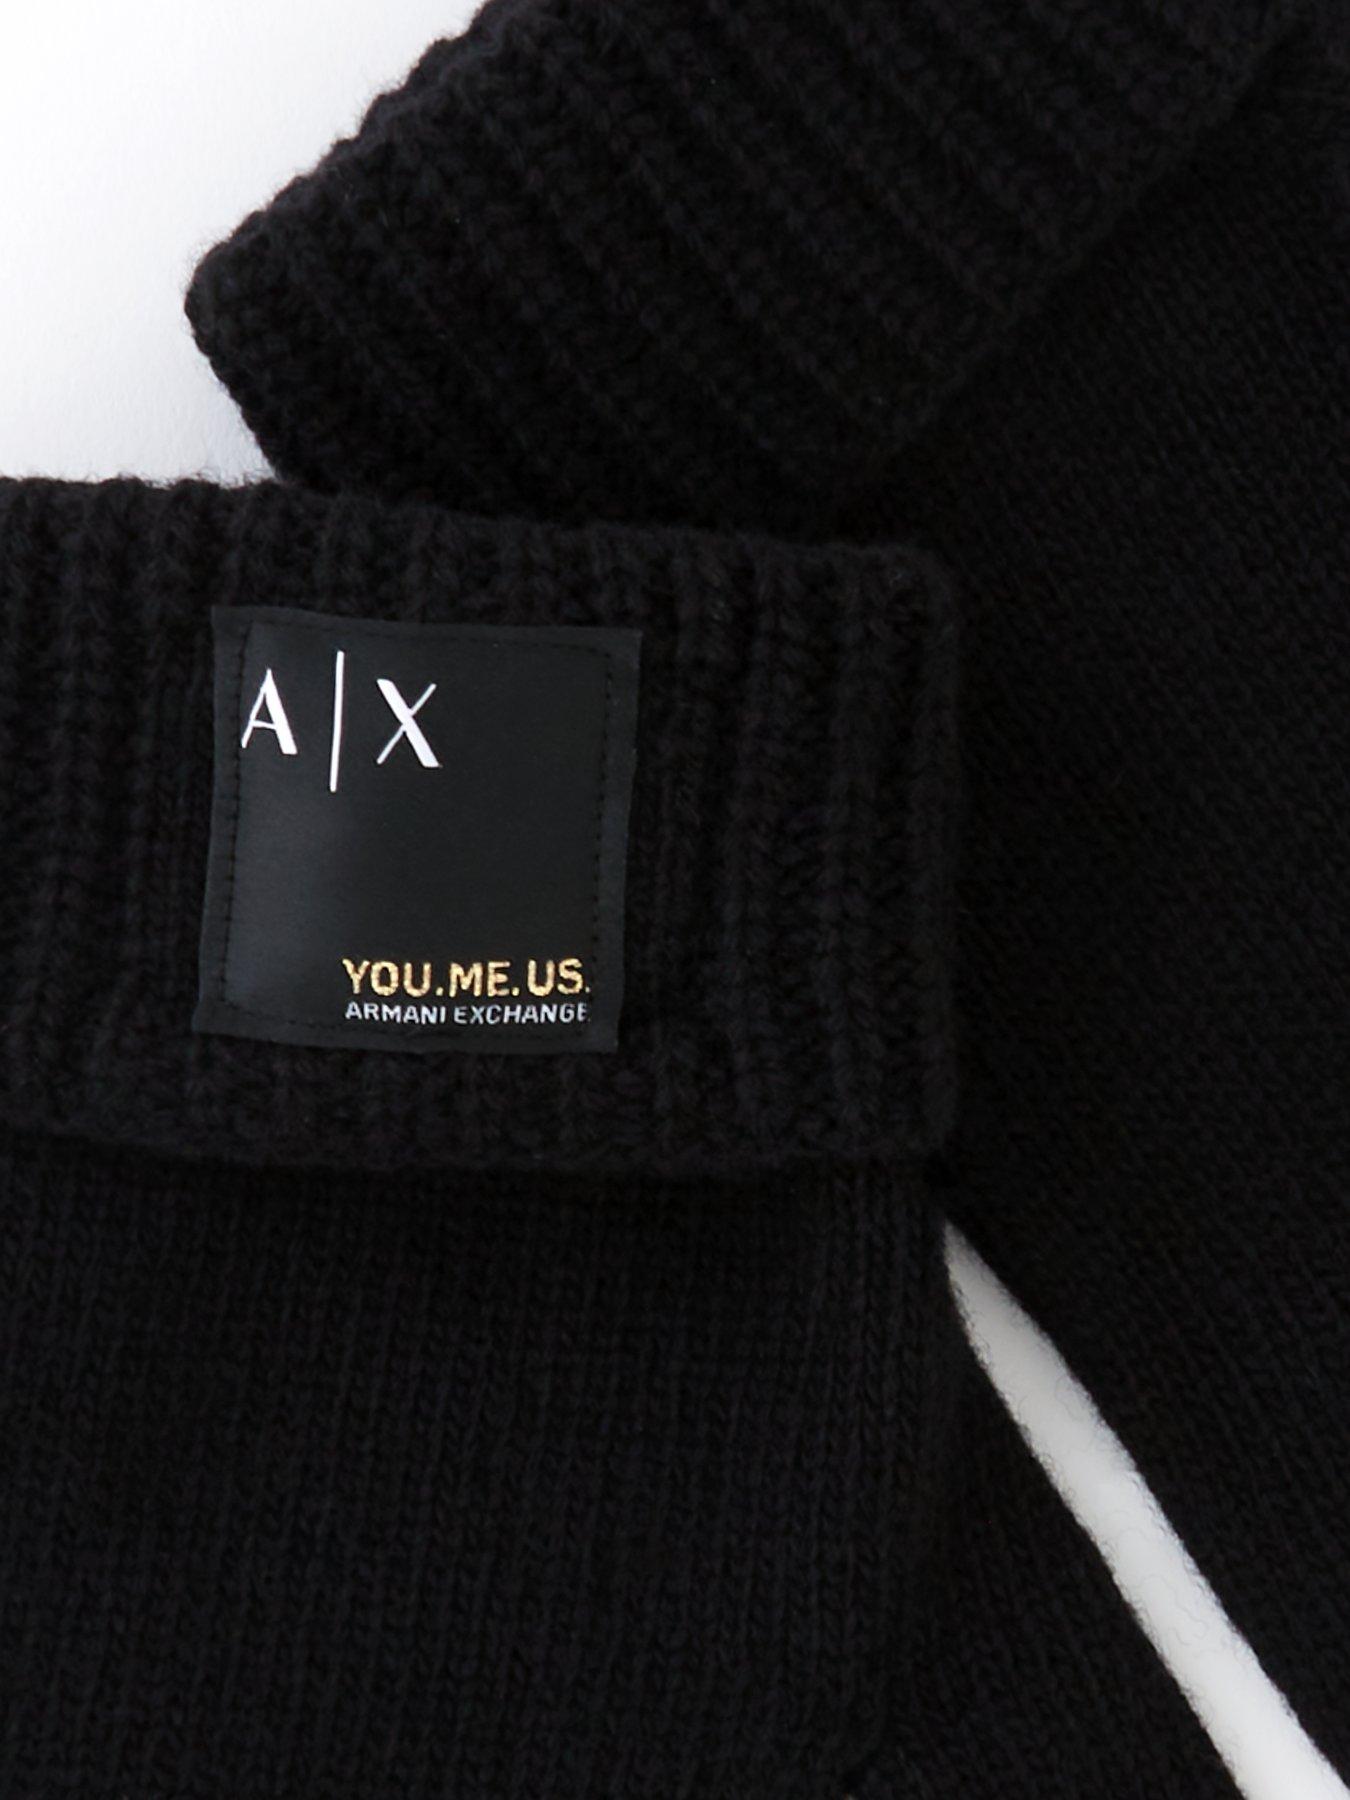 Armani Exchange AX You Me Us Logo Knitted Gloves - Black 